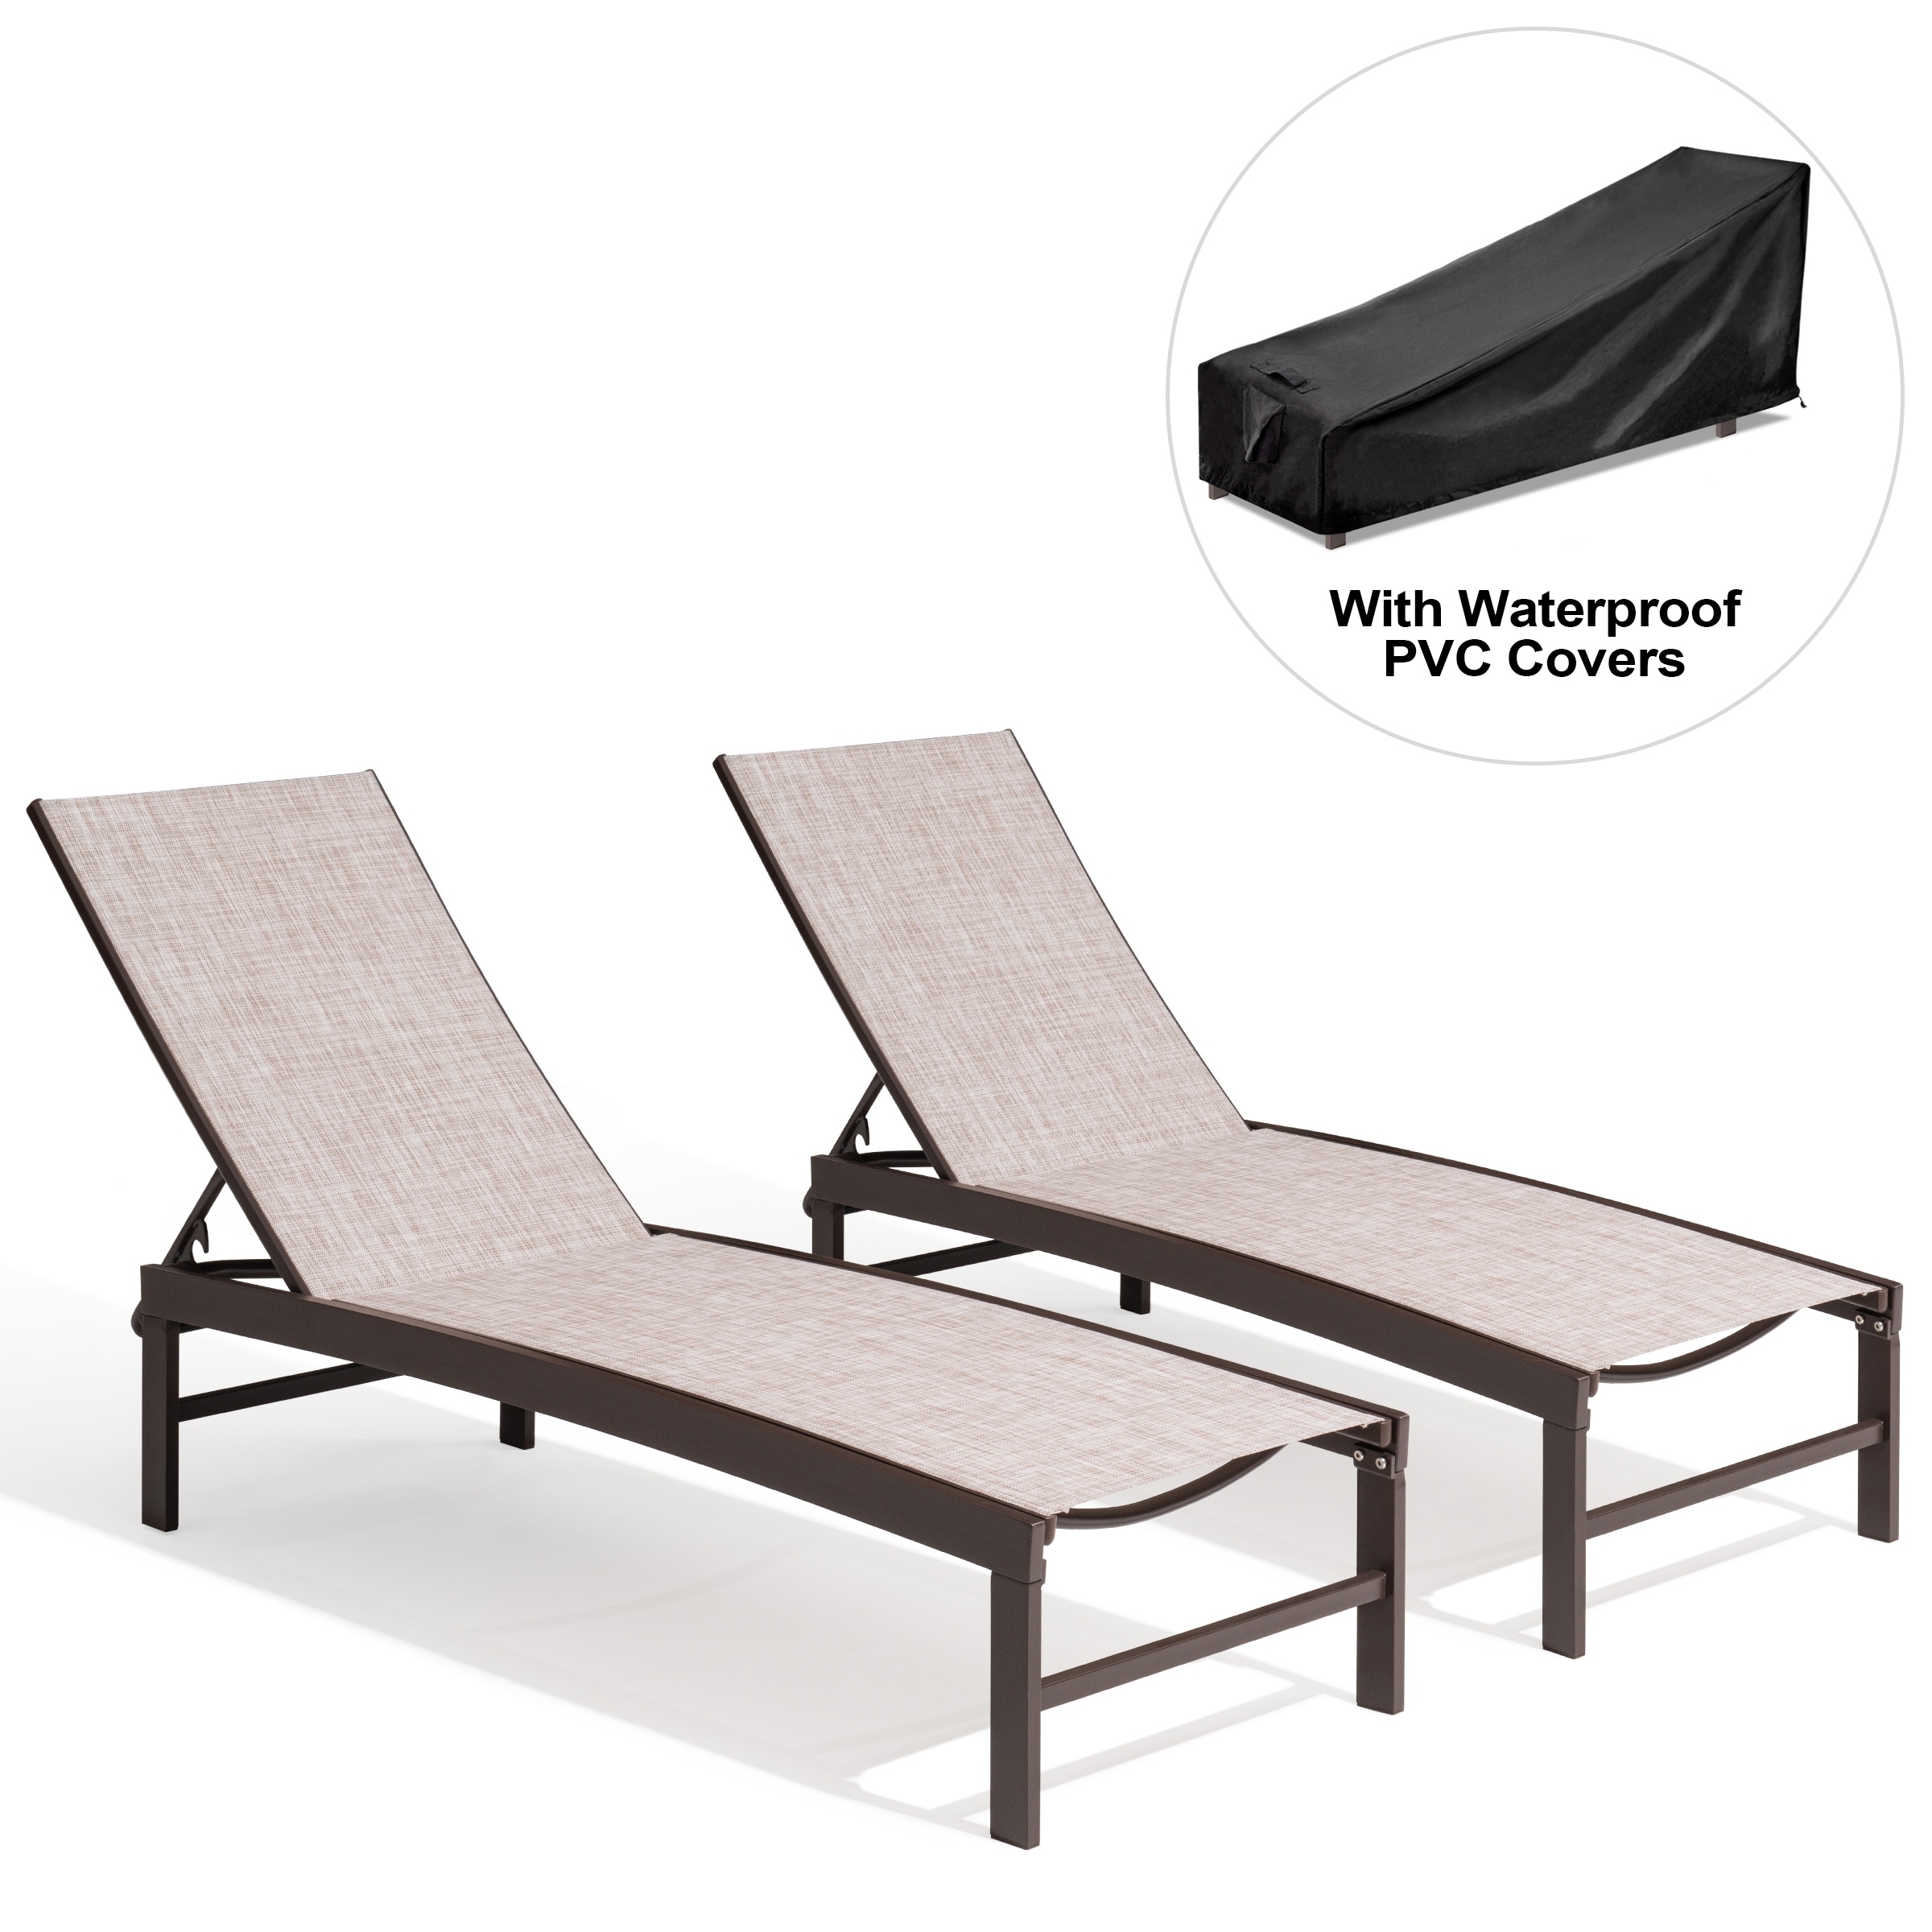 Crestlive Outdoor Loungers Patio Chaise Lounge Chairs Set Of 2 With Waterproof Covers - 71.65 L X 21.85 W X 13.78 H